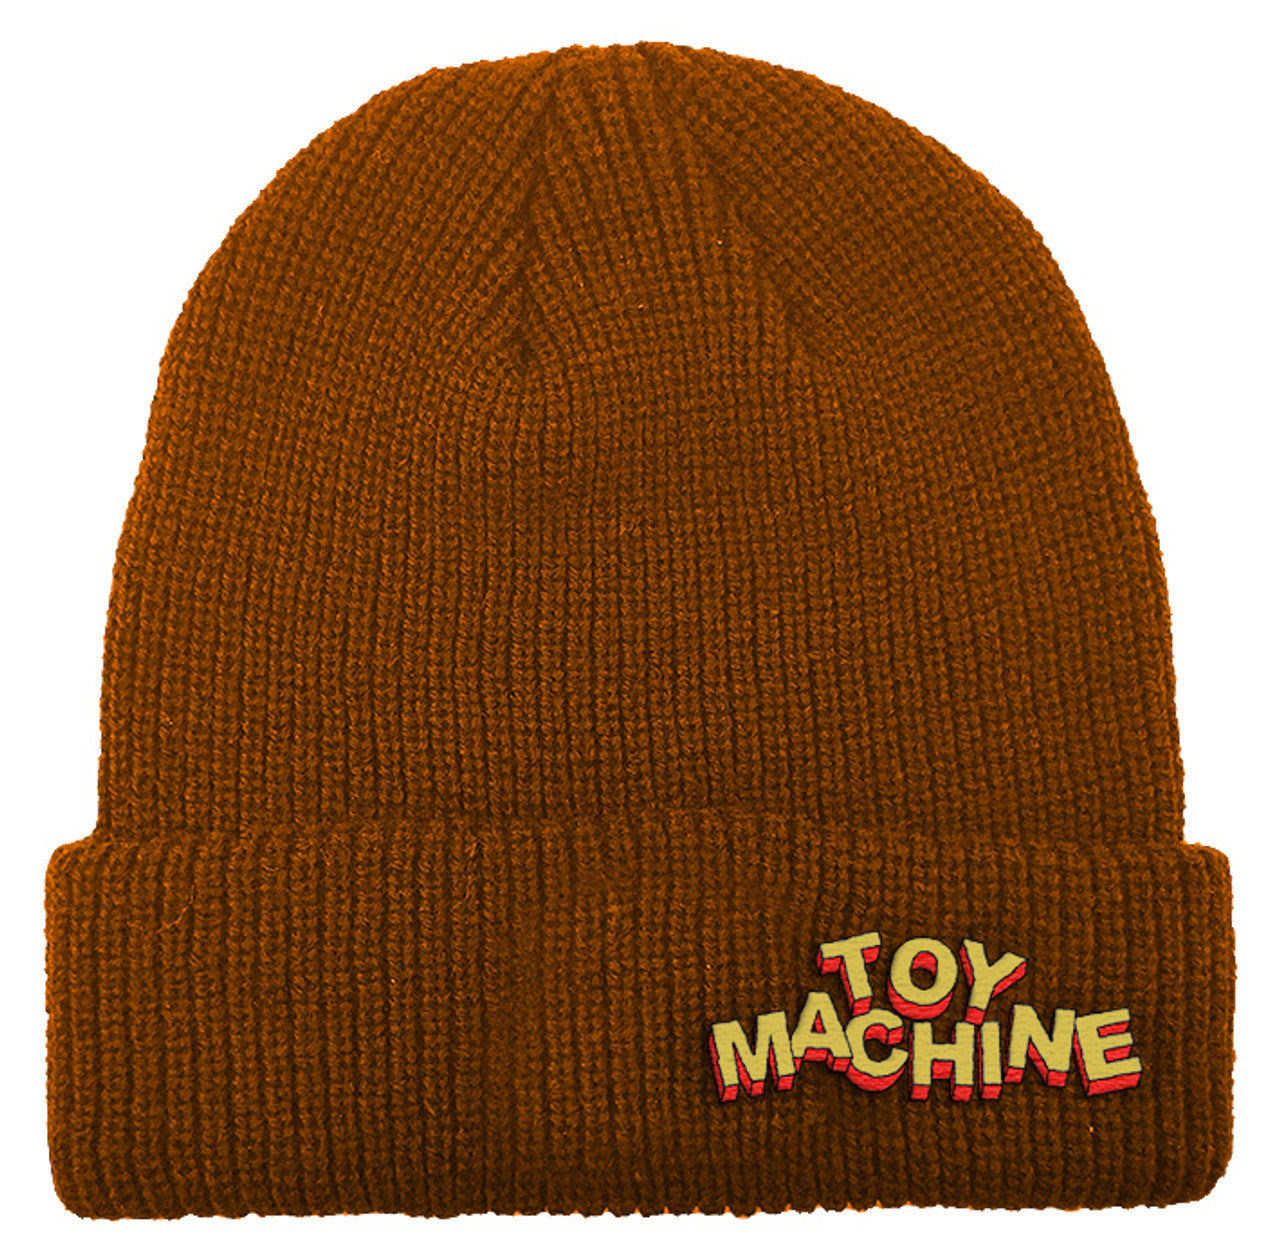 Toy Machine Hirotext Beanie Brown - Invisible Board Shop